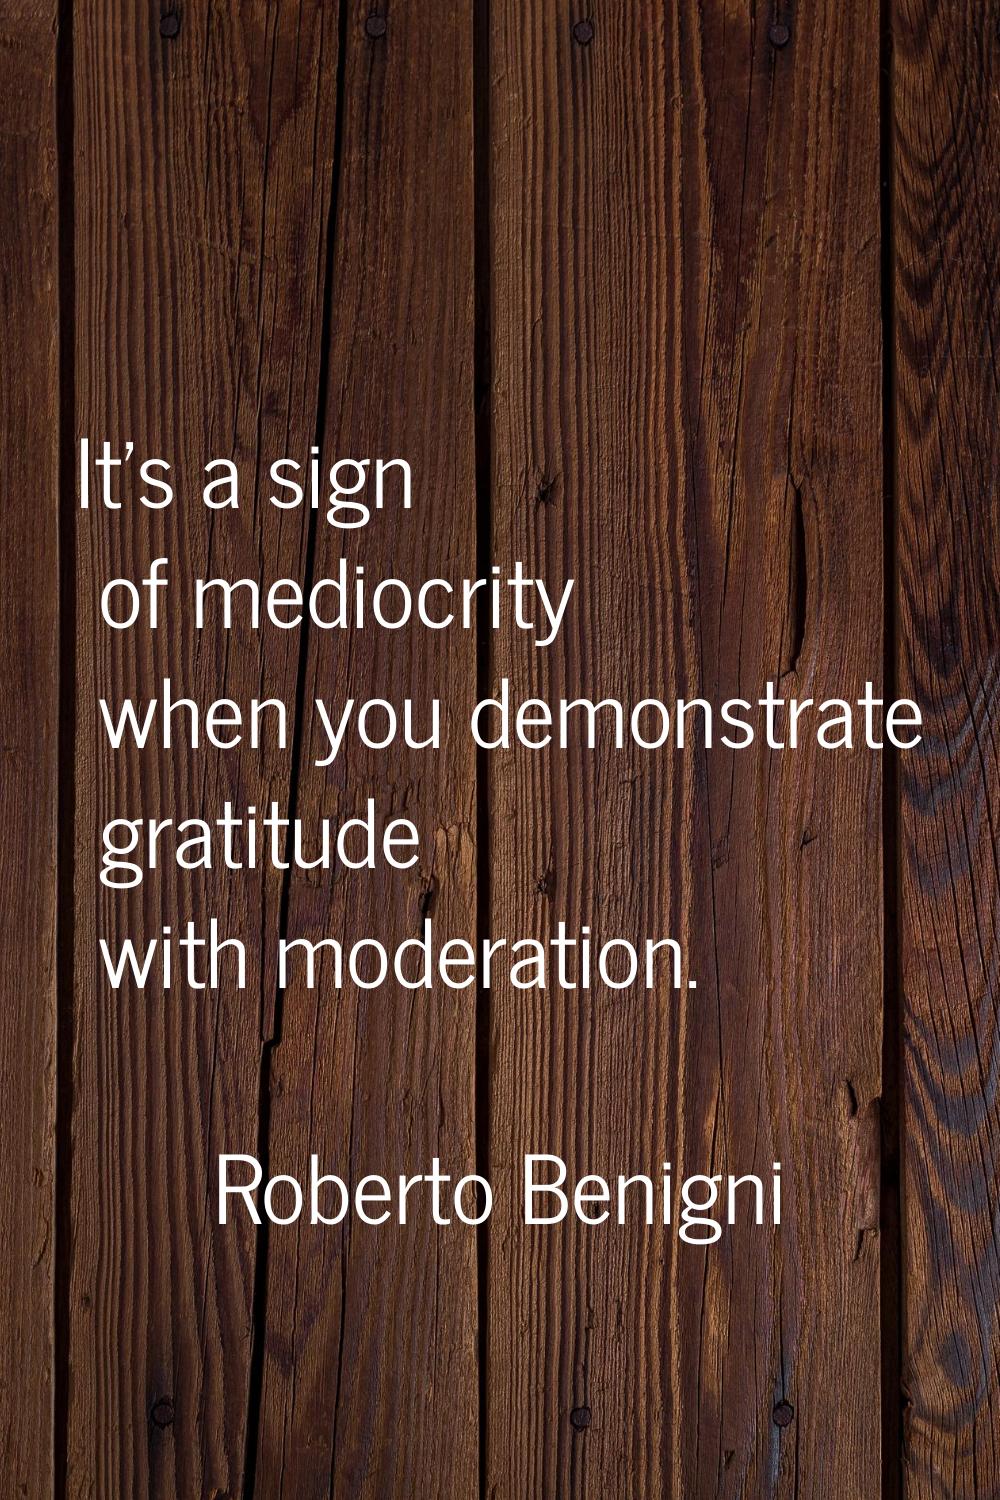 It's a sign of mediocrity when you demonstrate gratitude with moderation.